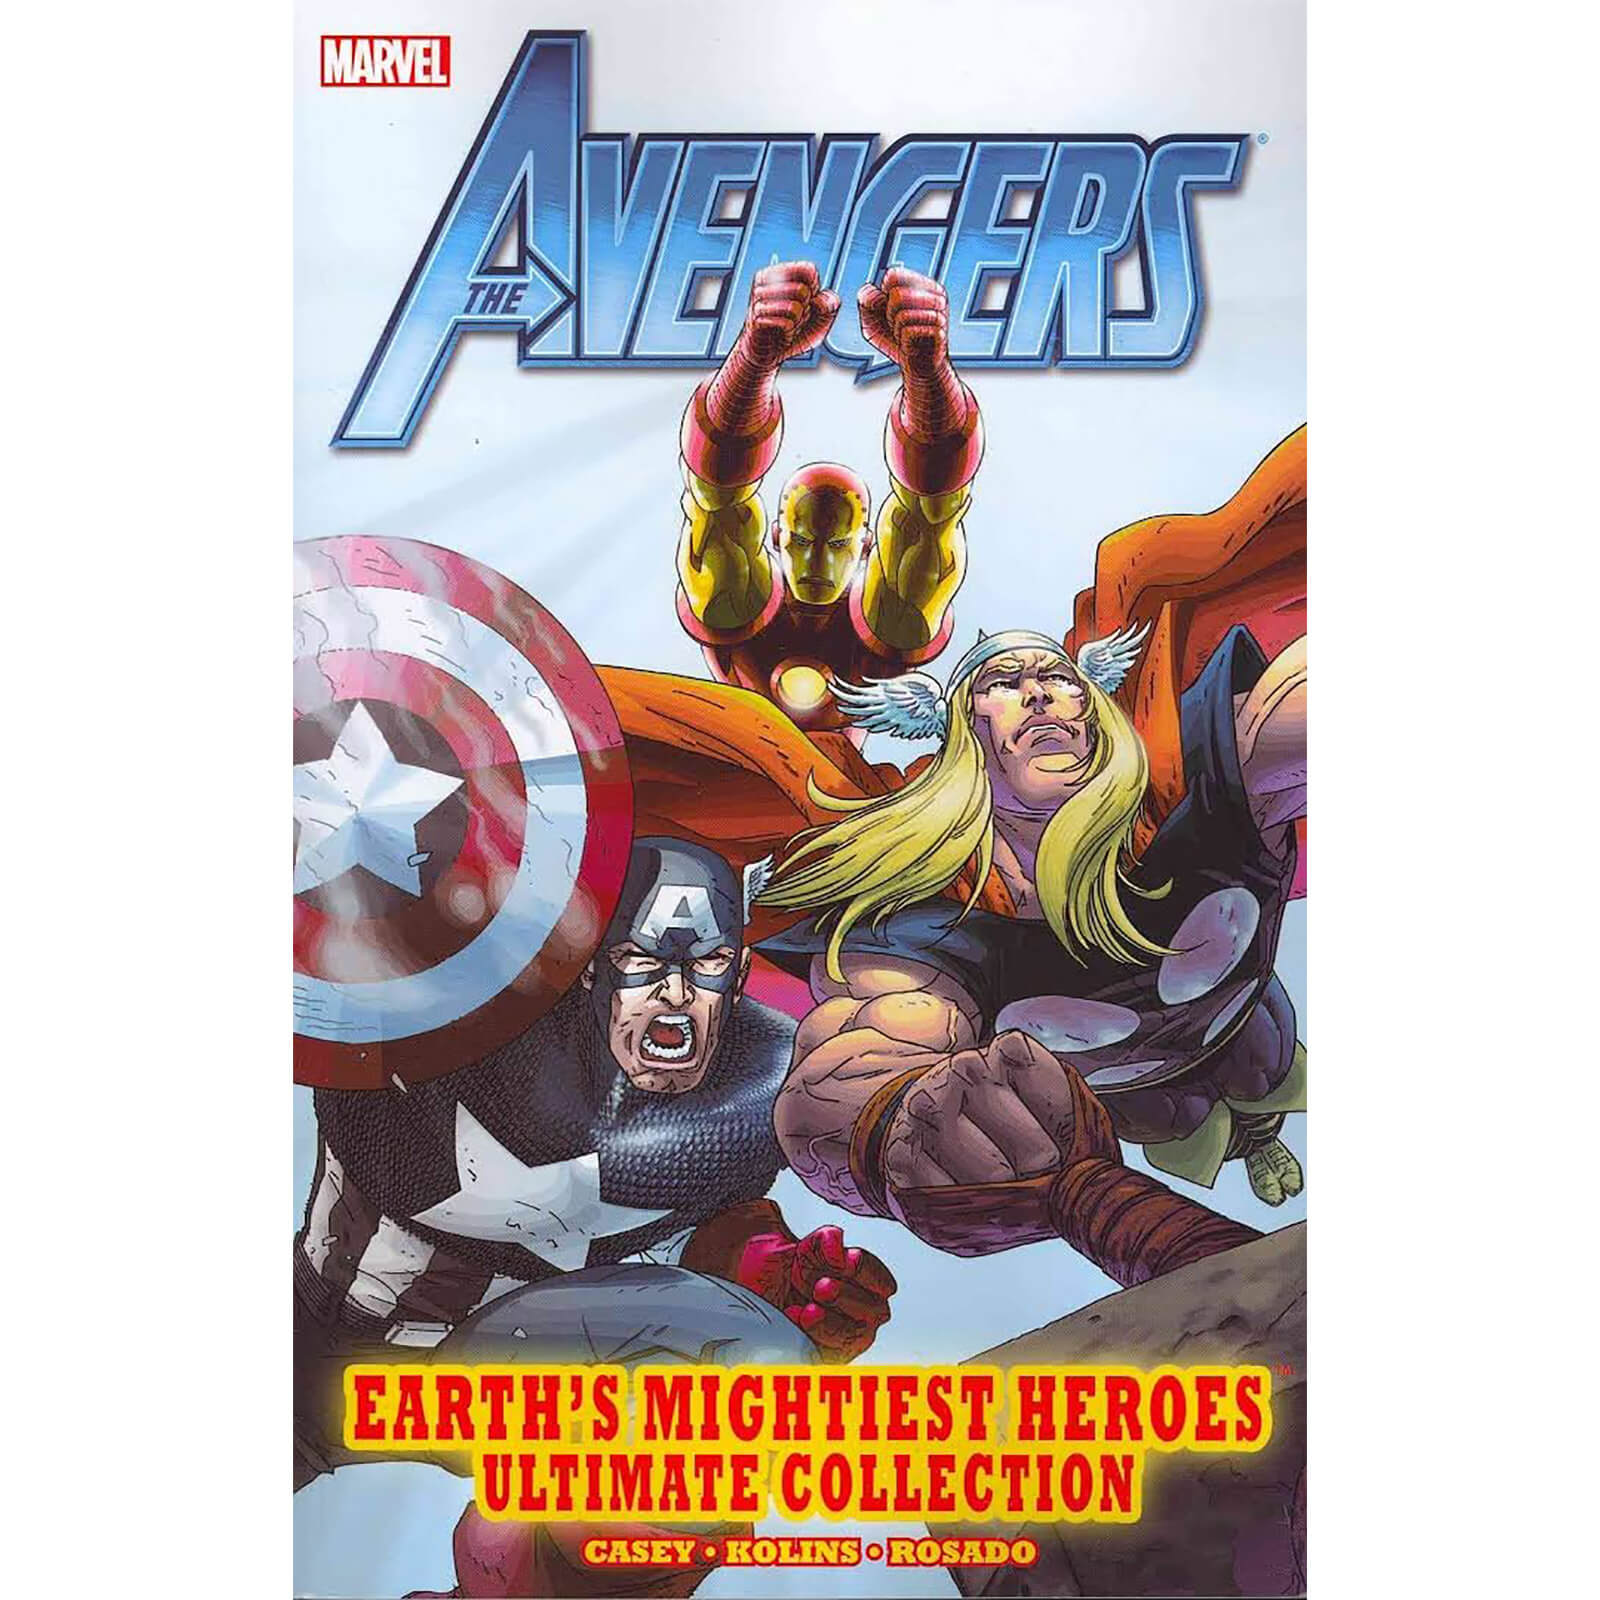 Marvel Avengers: Earth's Mightiest Heroes Ultimate Collection Graphic Novel Paperback